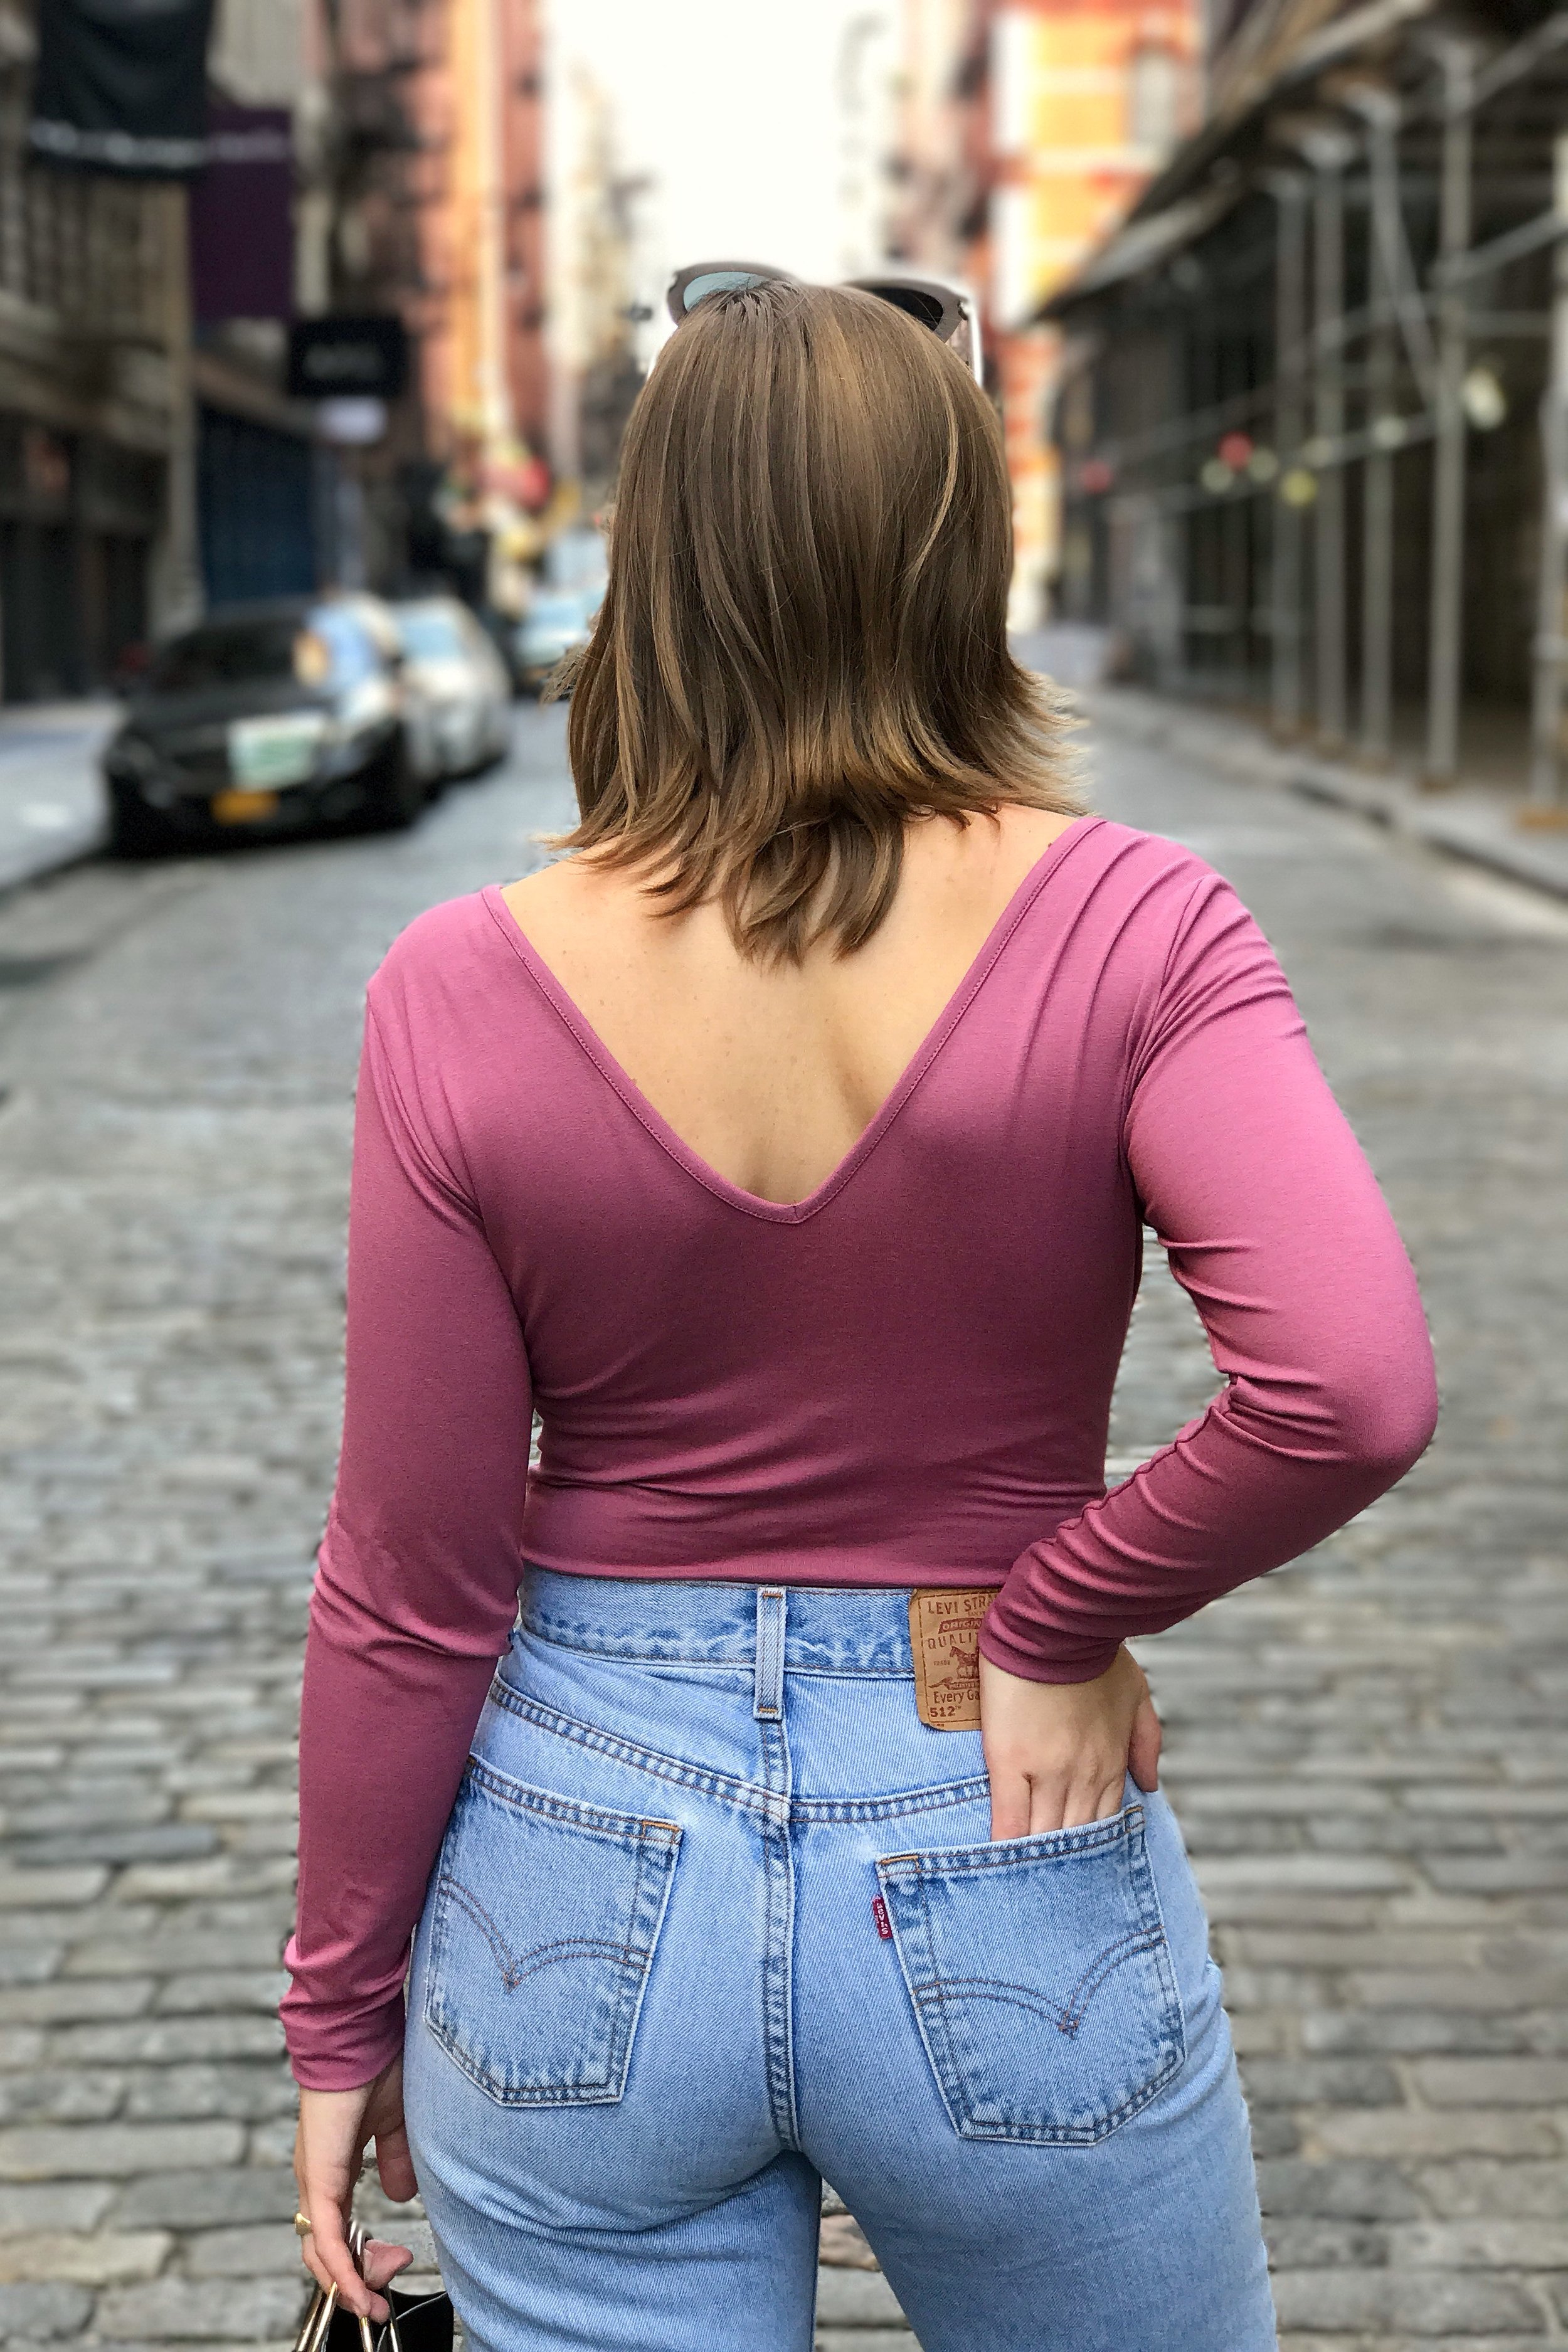 Vintage Levi's Jeans from L Train Vintage - How to Shop for Vintage Jeans When You're Petite &amp; Curvy